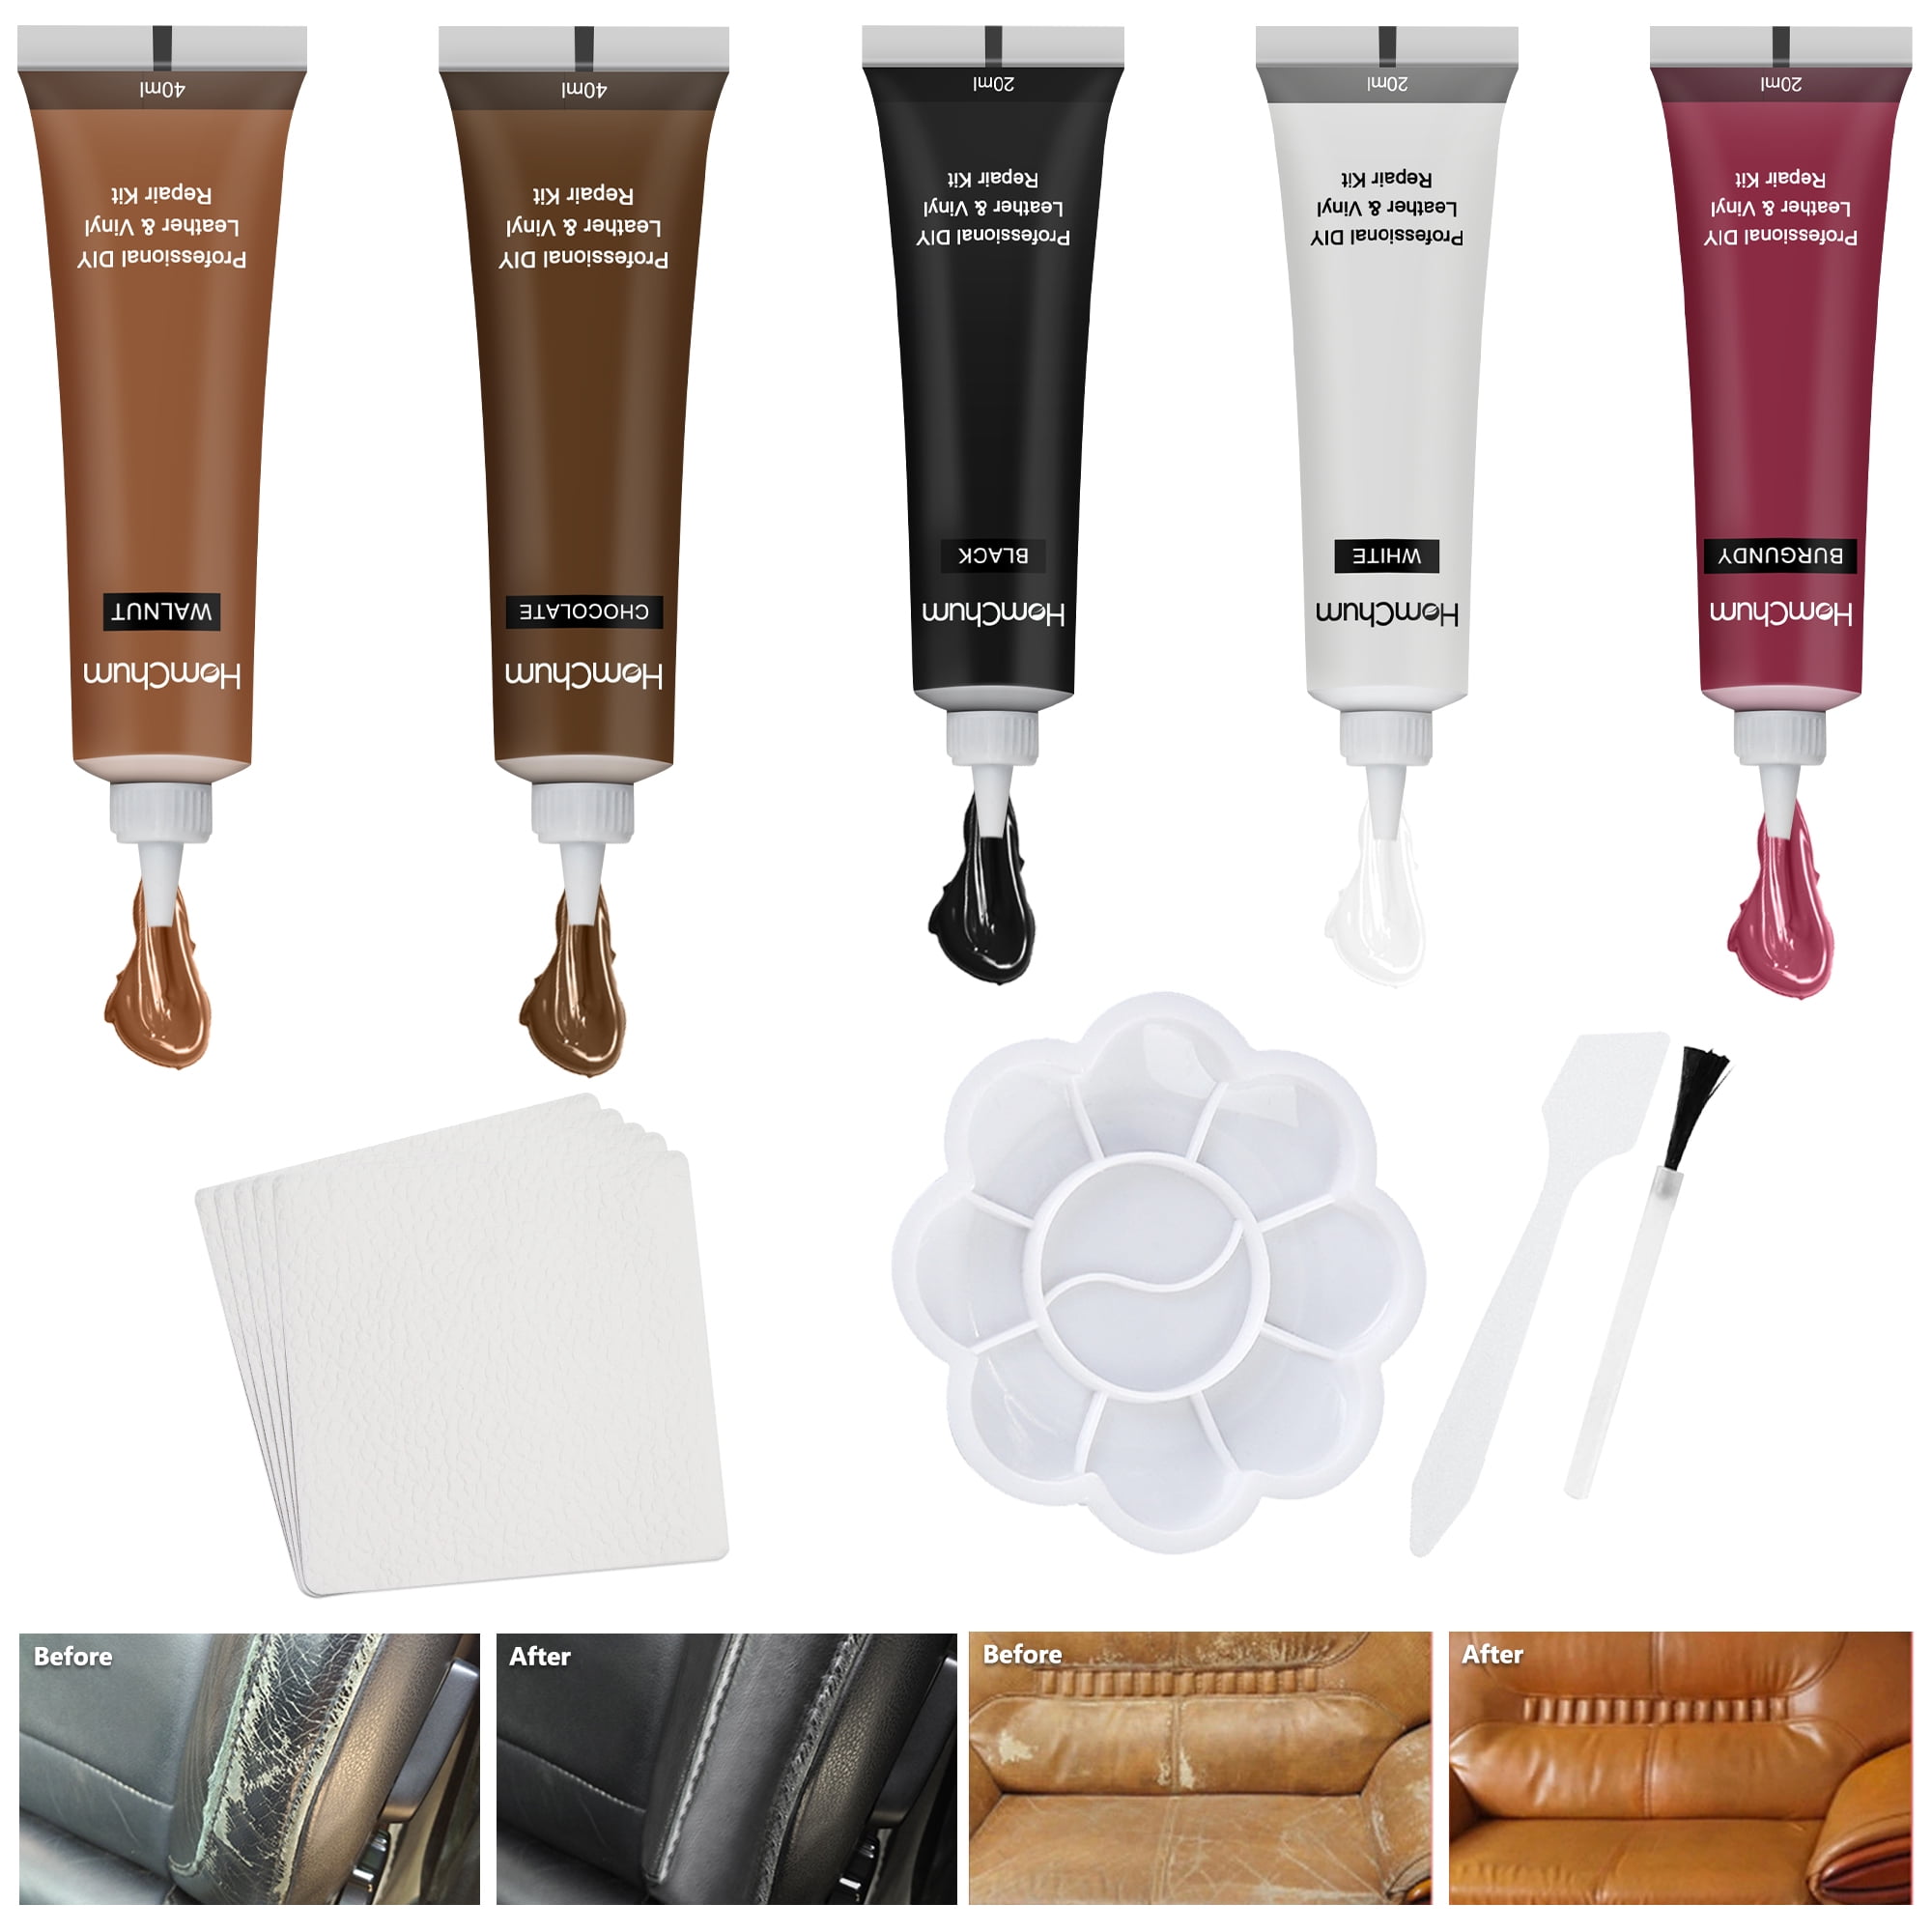 HomChum Leather Repair Kits for Couches Dark Brown, Black Leather Repair  Kit for Couch Leather - Leather Restorer Vinyl Repair Kit - Leather Scratch  Repair for Couch, Boat Seats 